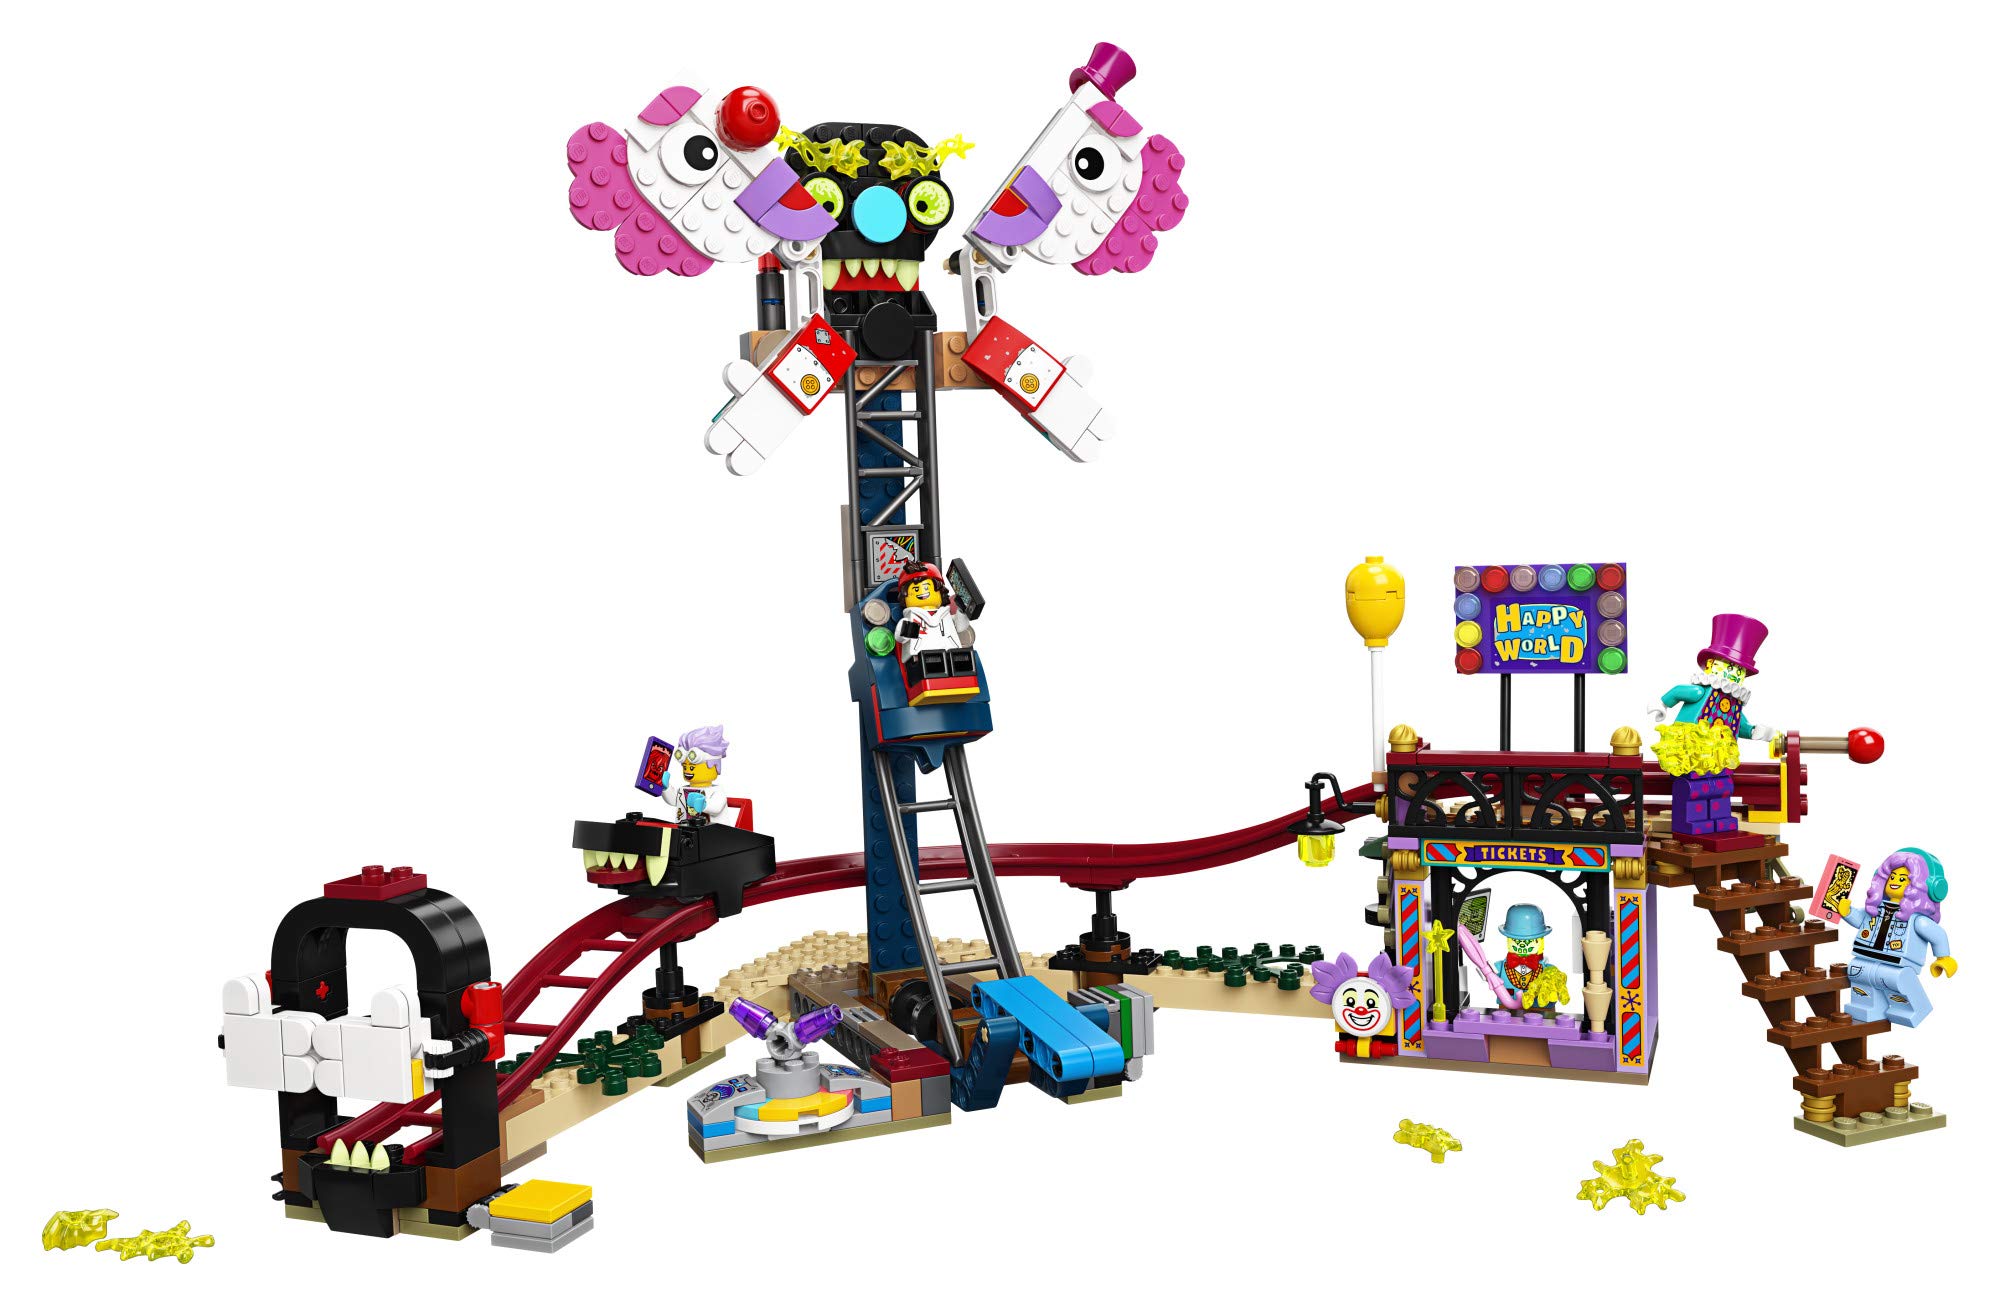 LEGO Hidden Side Haunted Fairground 70432 Popular Ghost-Hunting Toy, Cool Augmented Reality Set for Kids, New 2020 (466 Pieces)